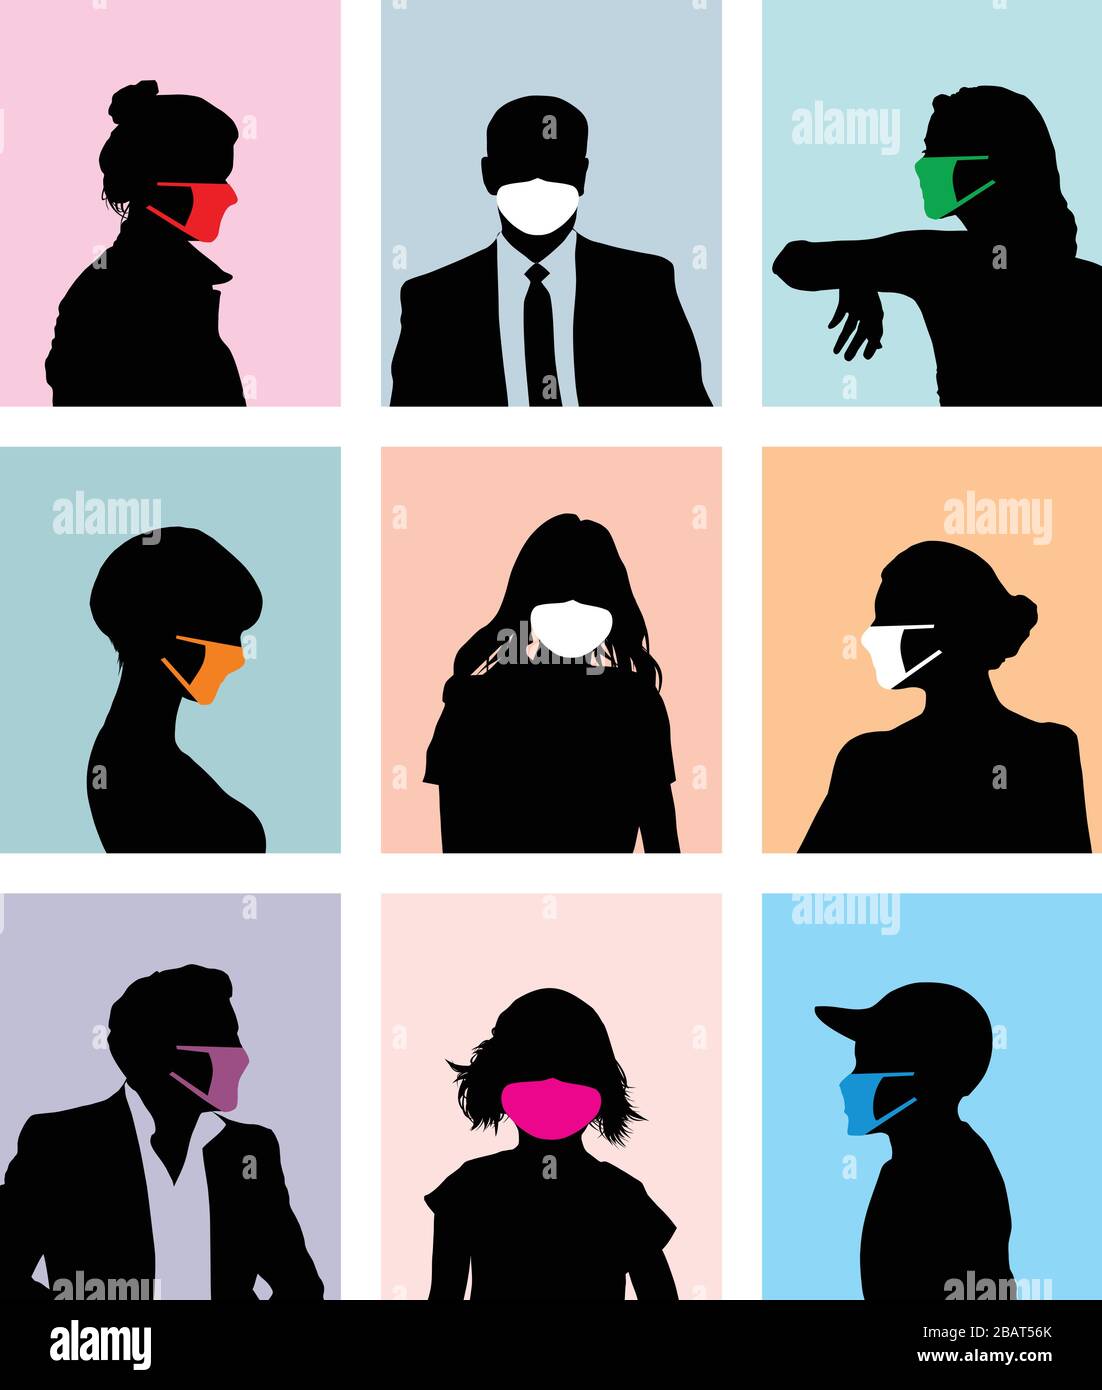 Avatars of people with masks against viruses Stock Vector